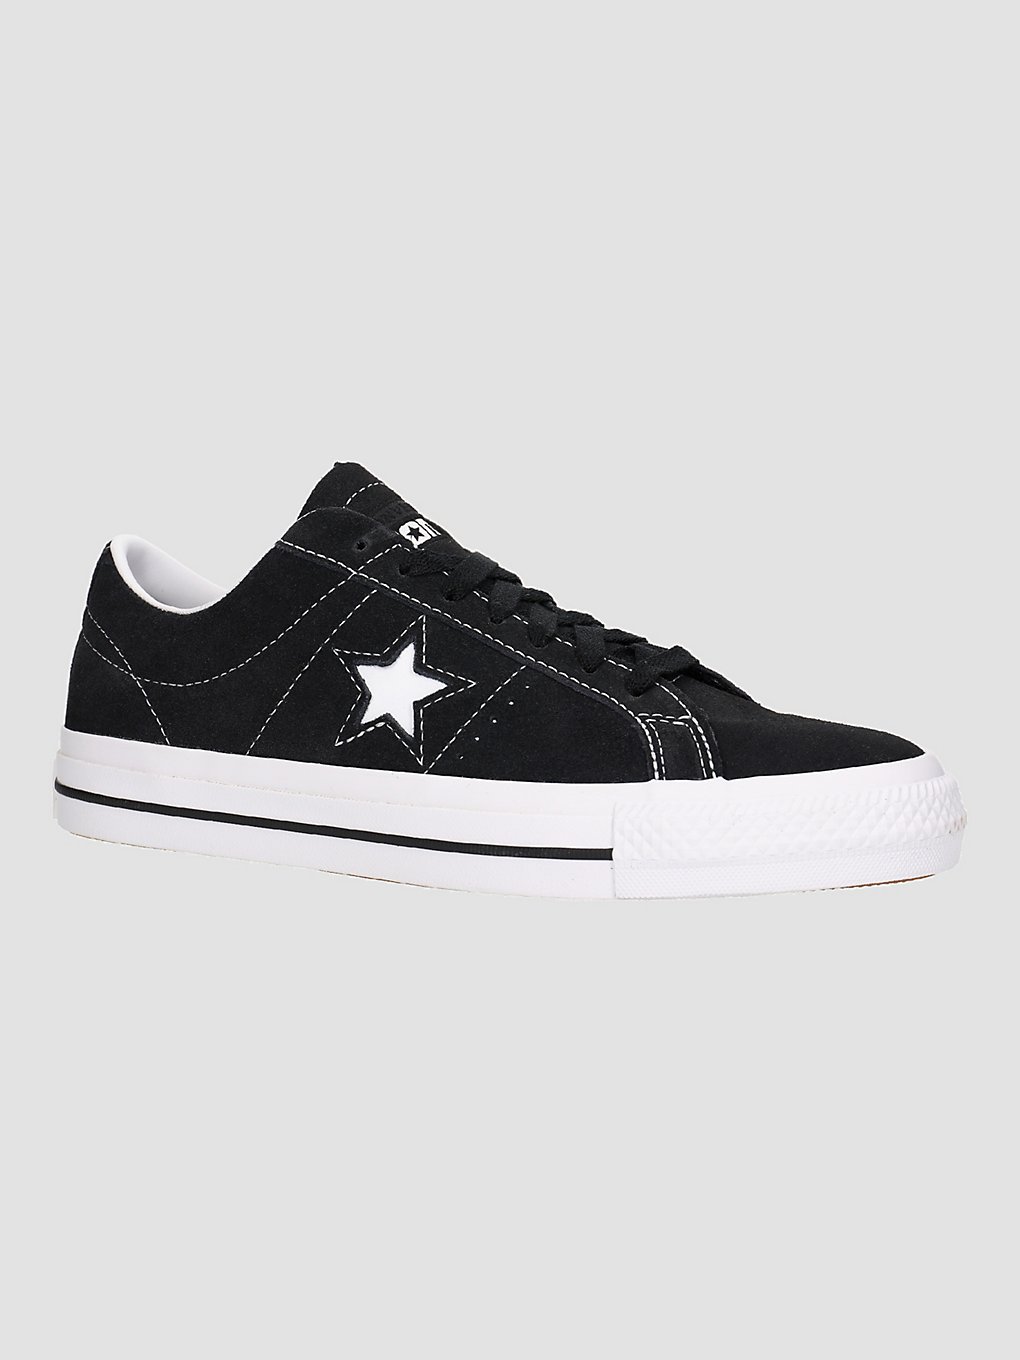 Converse One Star Pro Skate Shoes white kaufen